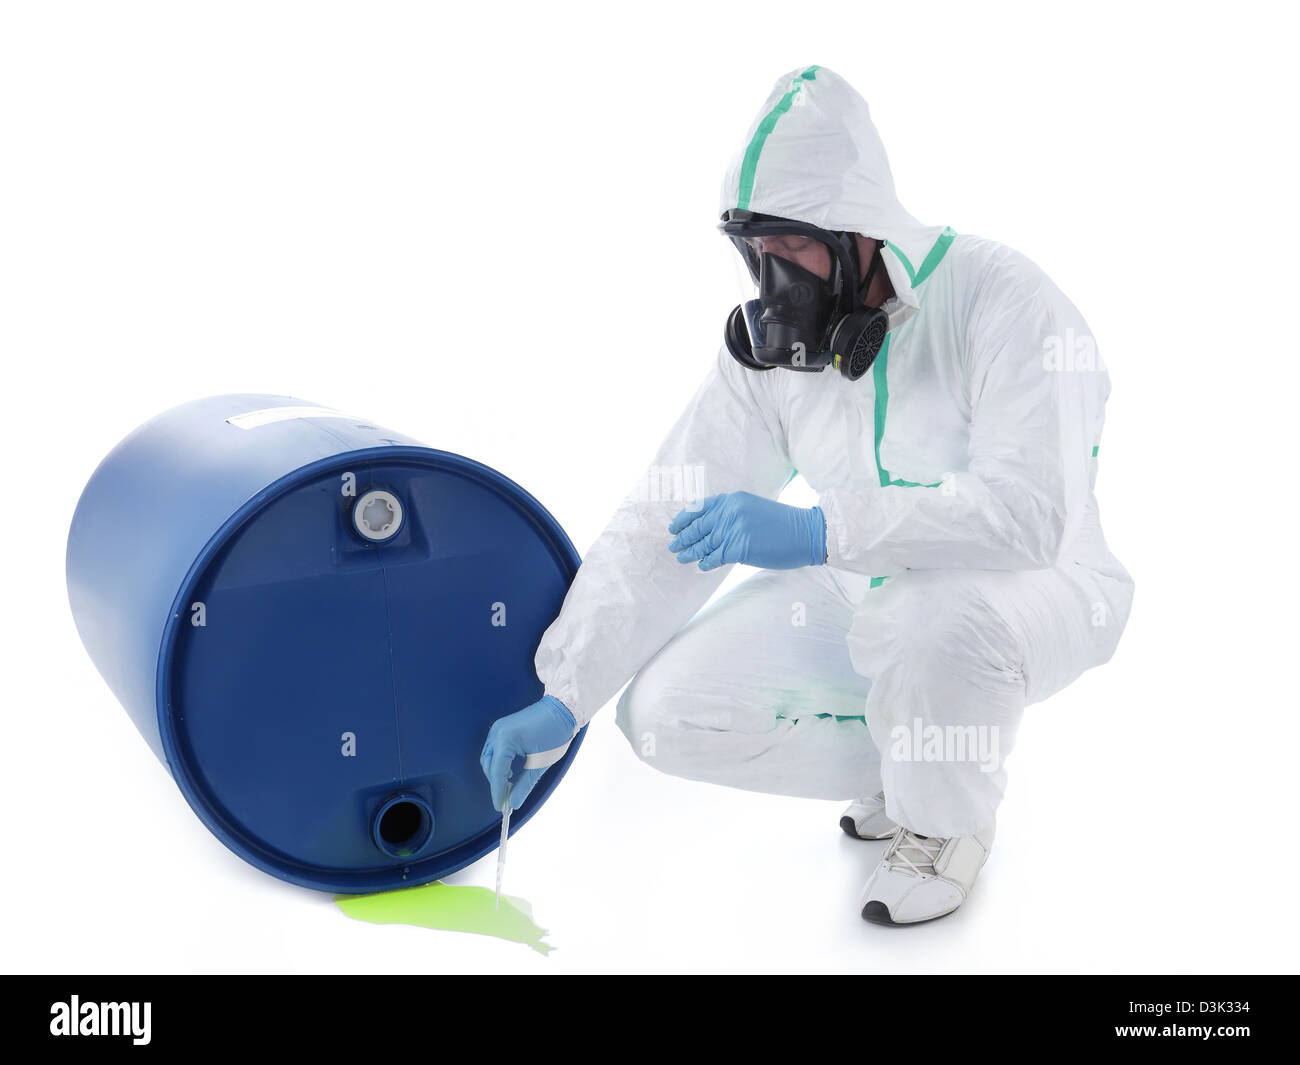 Man wearing protective suit and respirator sampling dangerous chemical liquid leaking from blue container Stock Photo